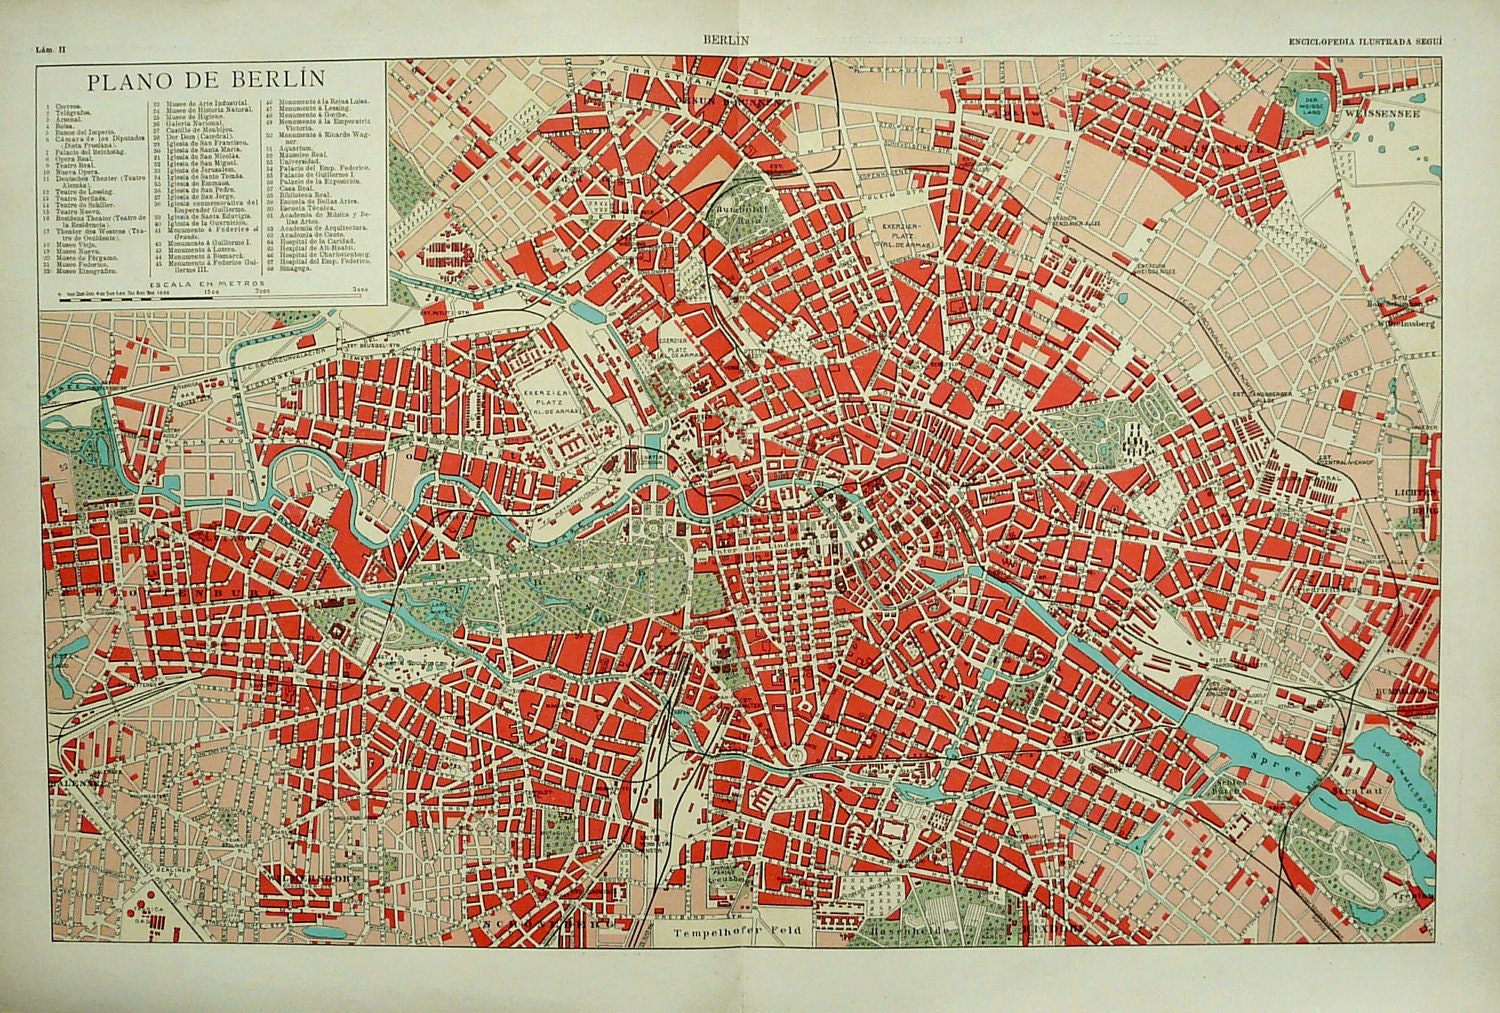 1900 Antique rare city map of BERLIN GERMANY. 112 years old